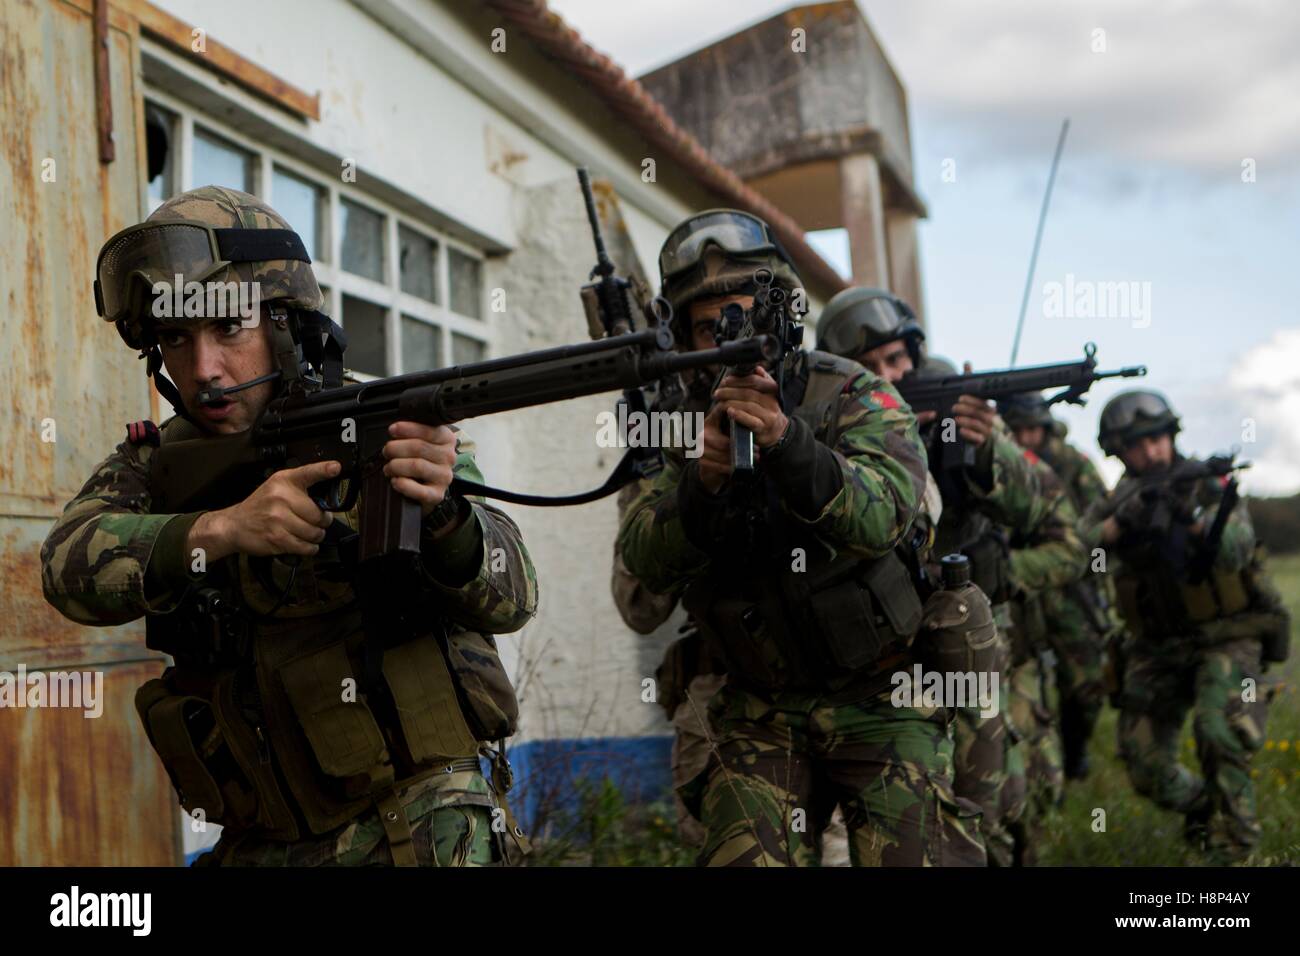 Portuguese Marines clear a room during an assault training exercise April 9, 2015 in Lisbon, Portugal. Stock Photo